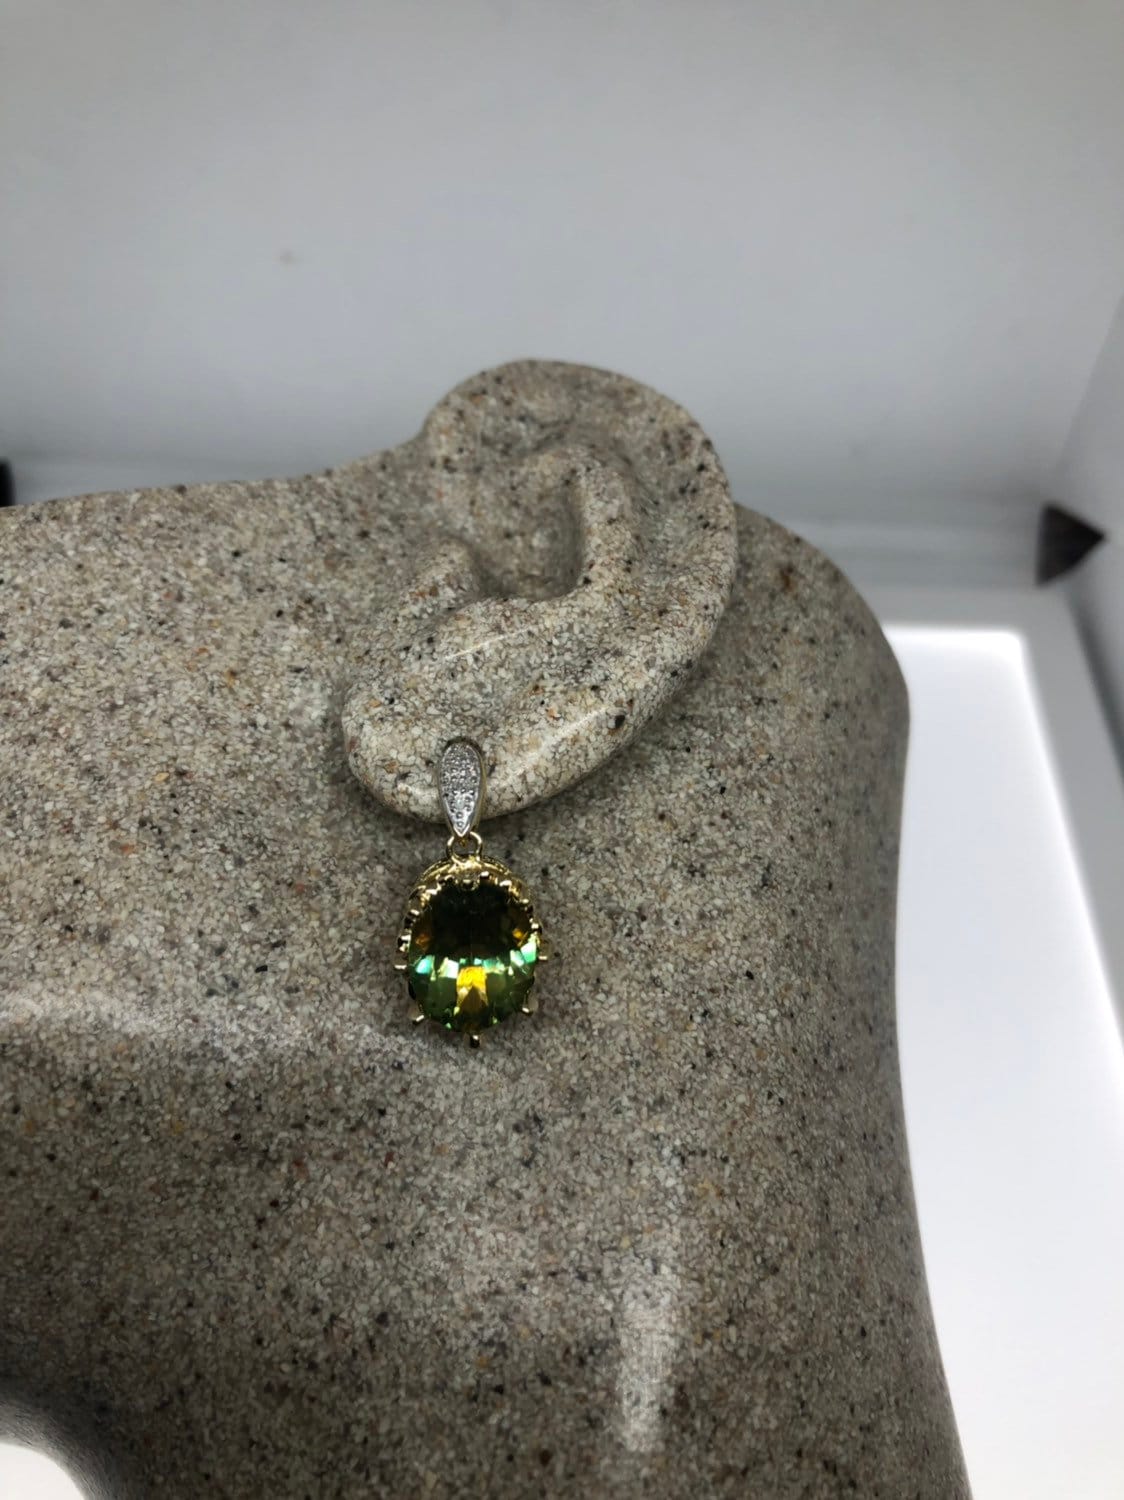 Vintage Handmade Gold Sterling Silver Genuine Green Mystic Peridot and White Sapphire Earrings